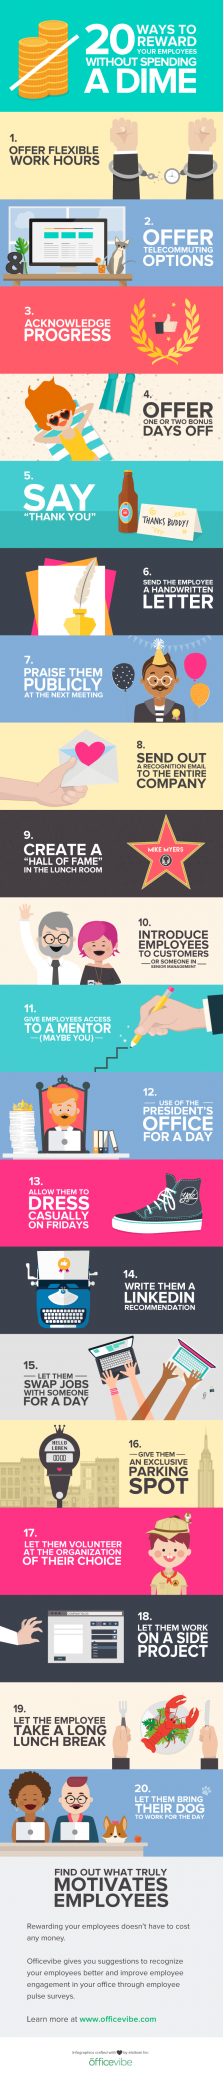 20 easy methods to Reward staff without cost (Infographic)